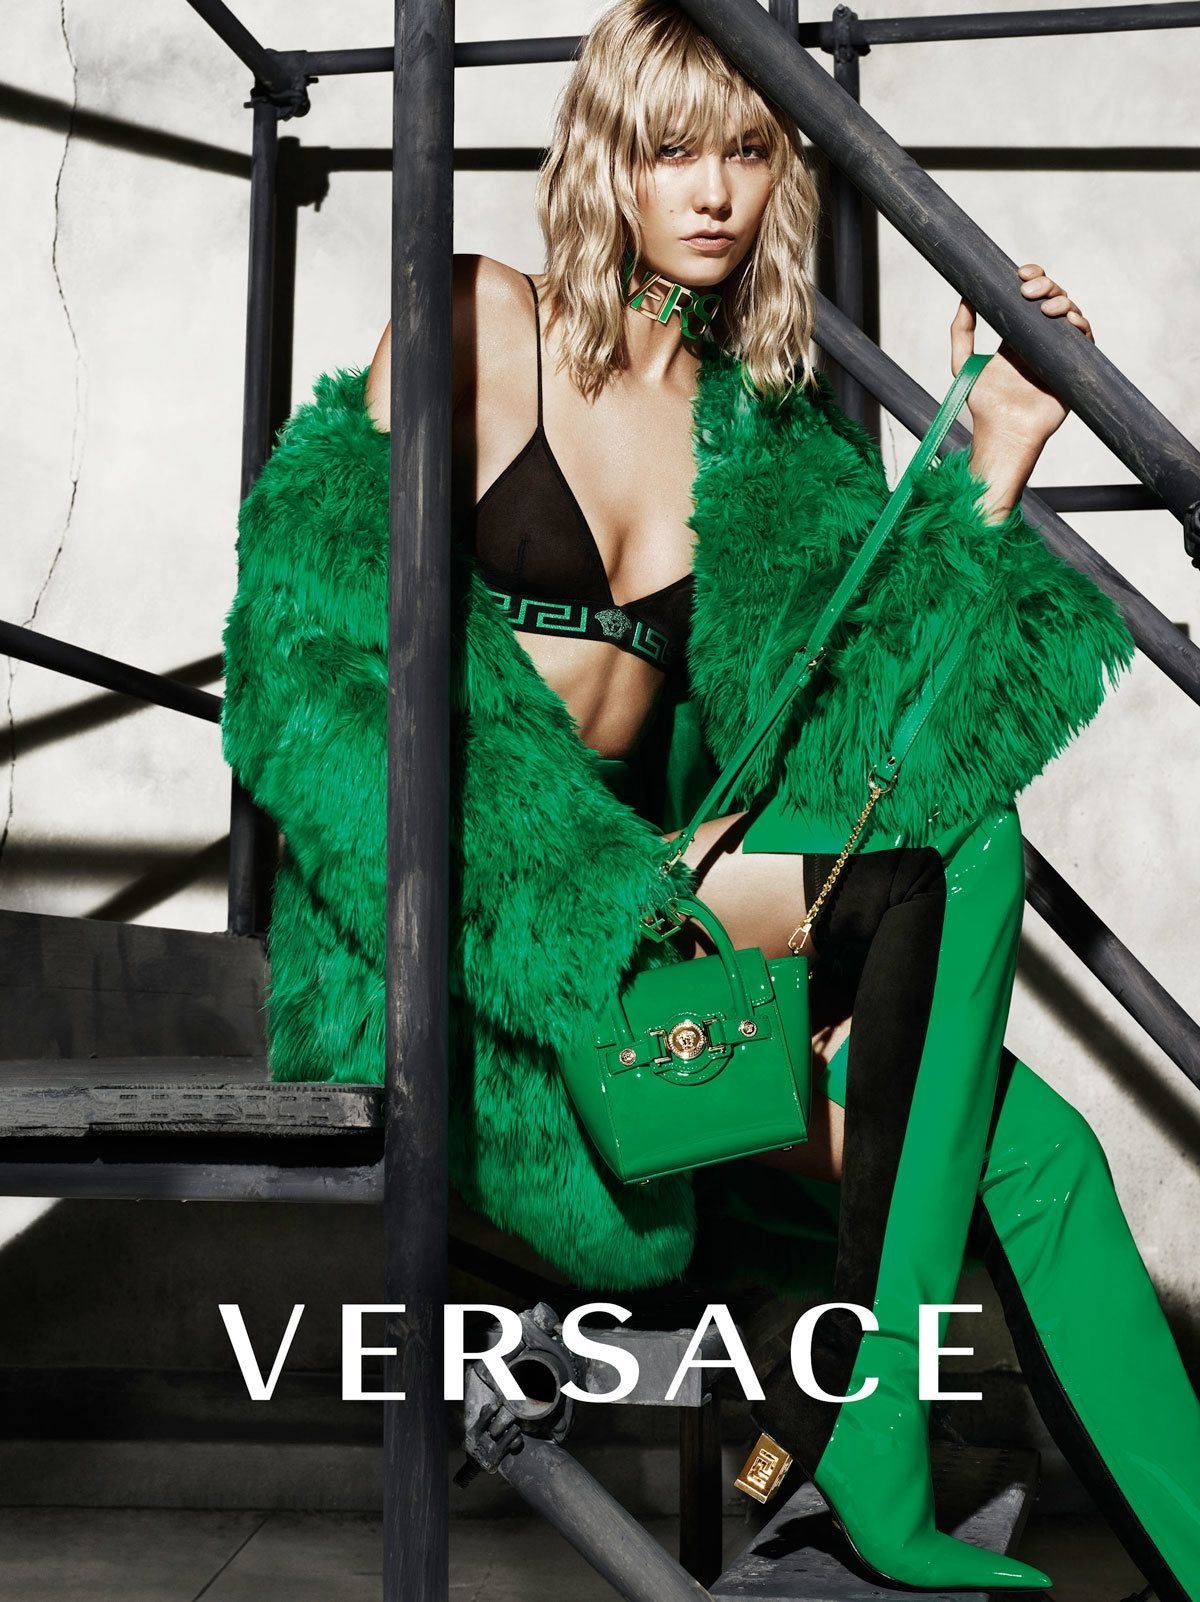 Versace brand follows in the footsteps of Gucci and Michael Kors: Say no to fur materials 4